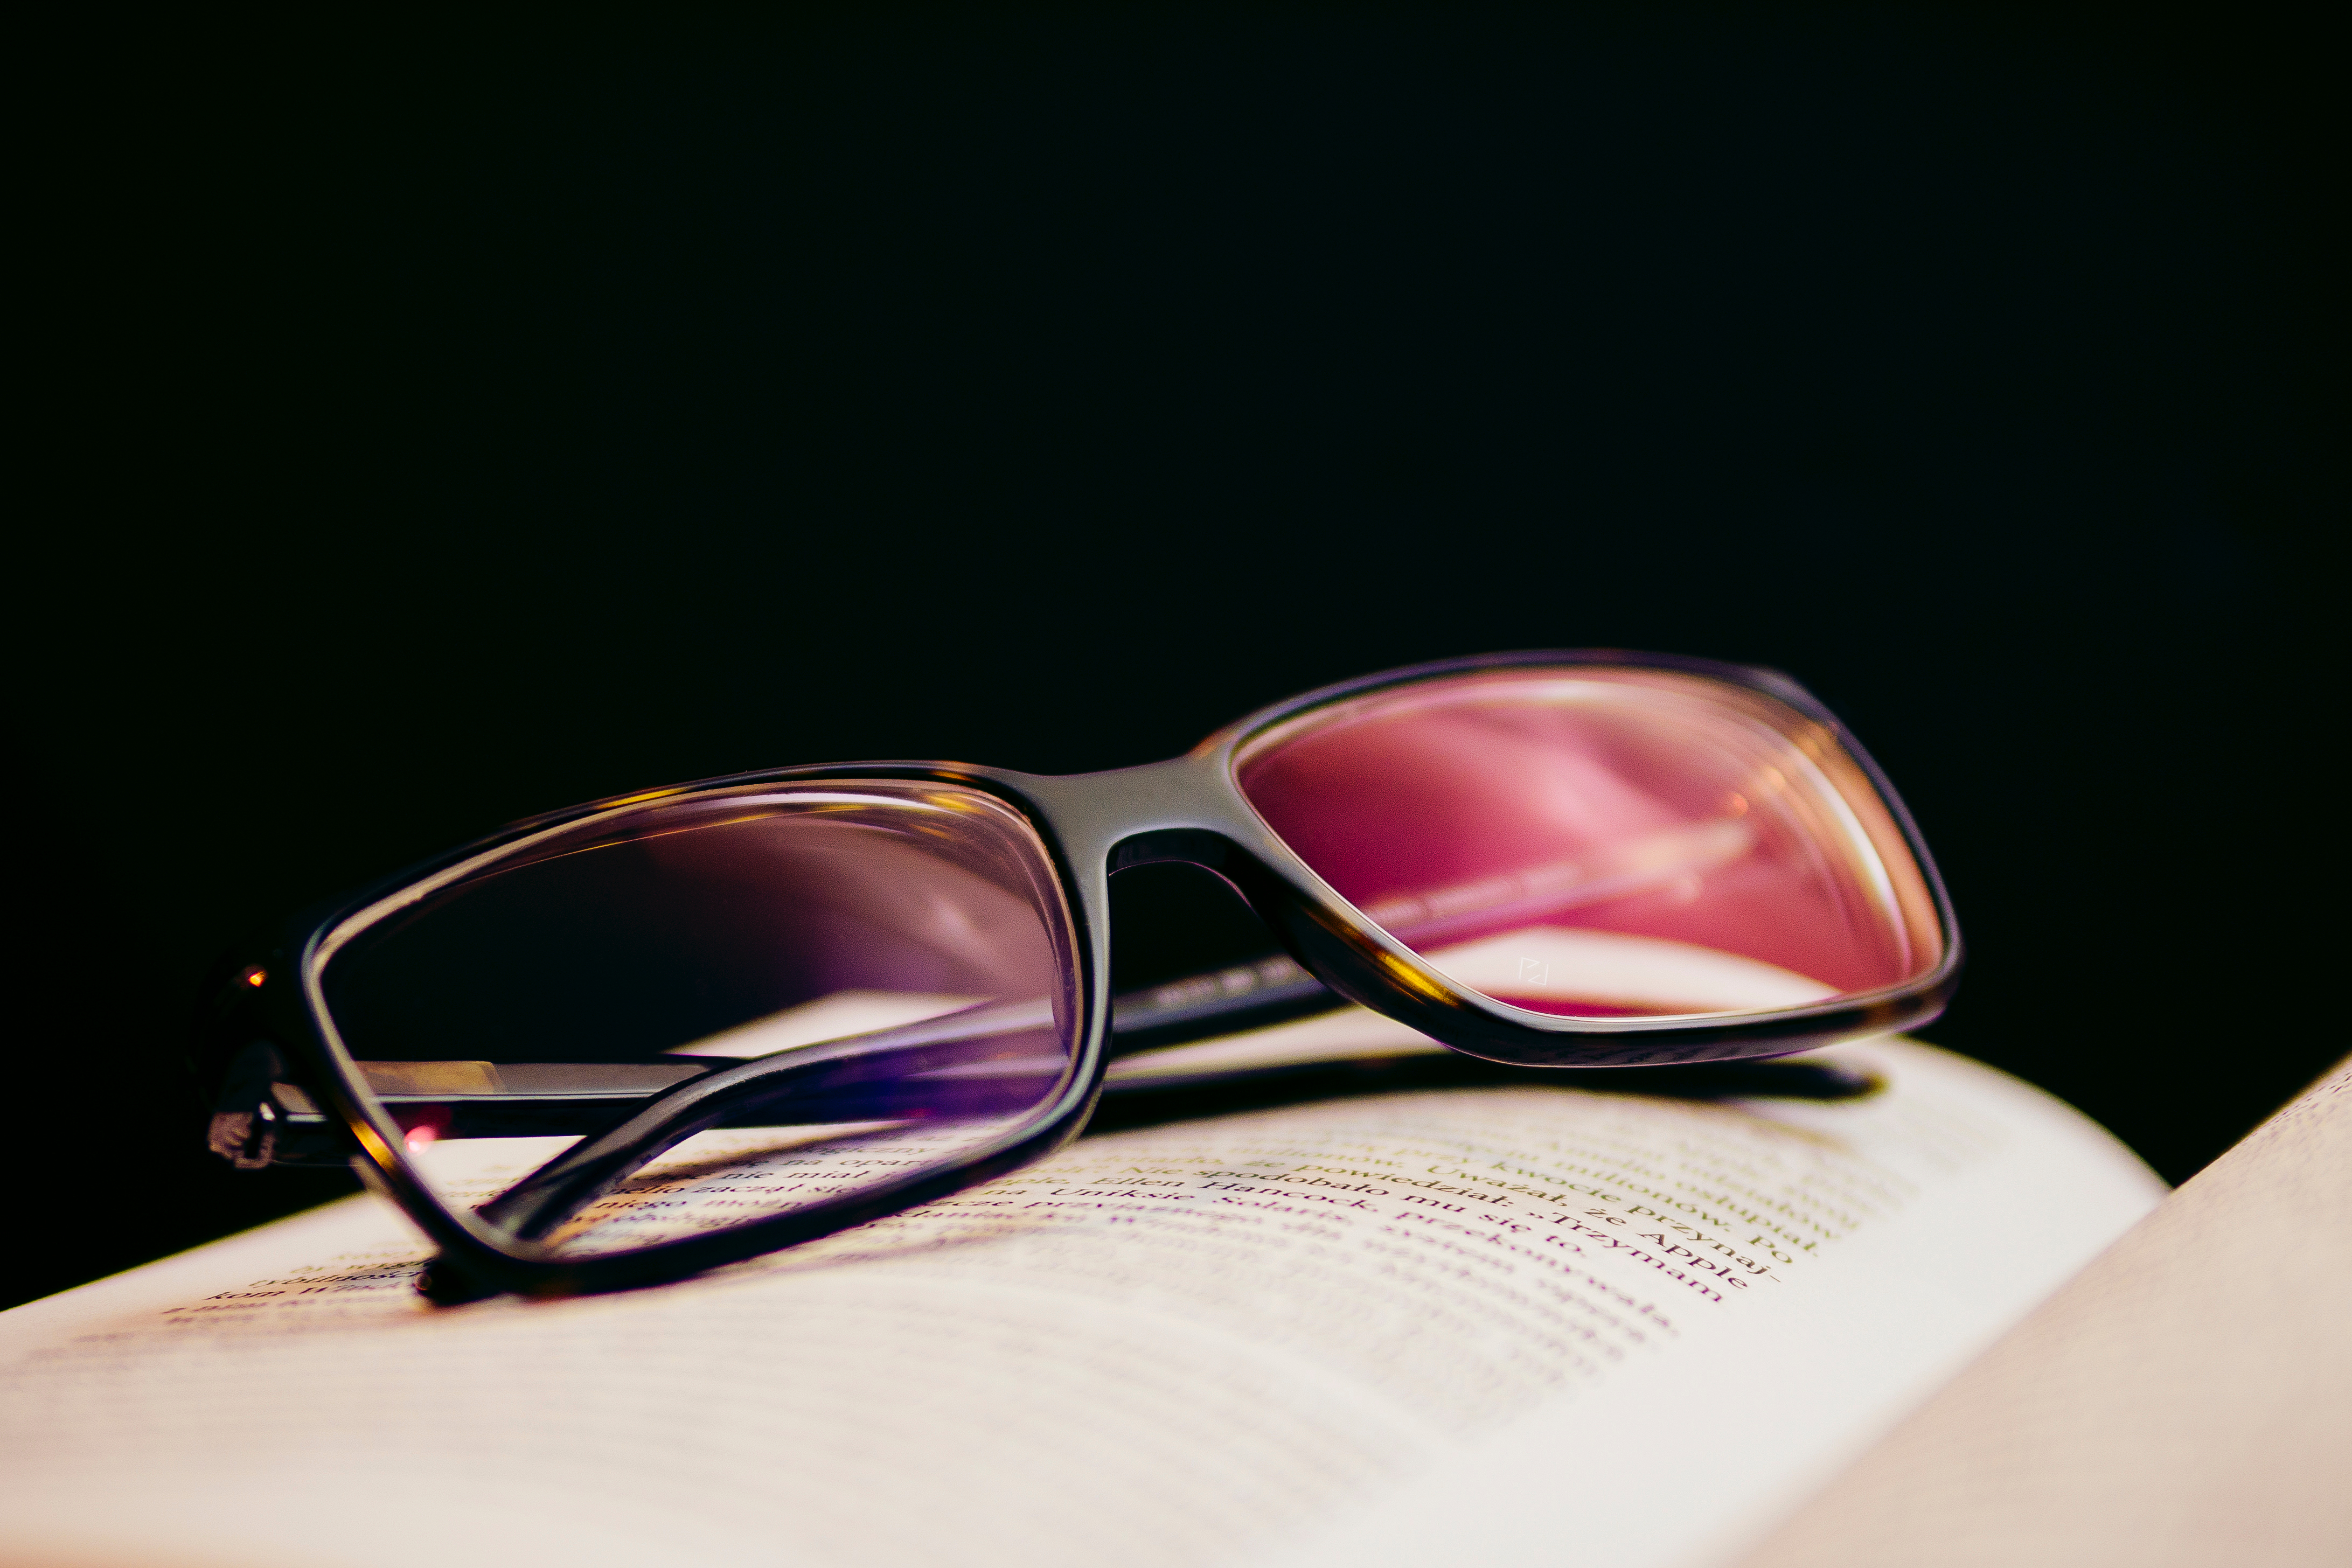 miscellanea, miscellaneous, book, lenses, glasses, spectacles, diopter